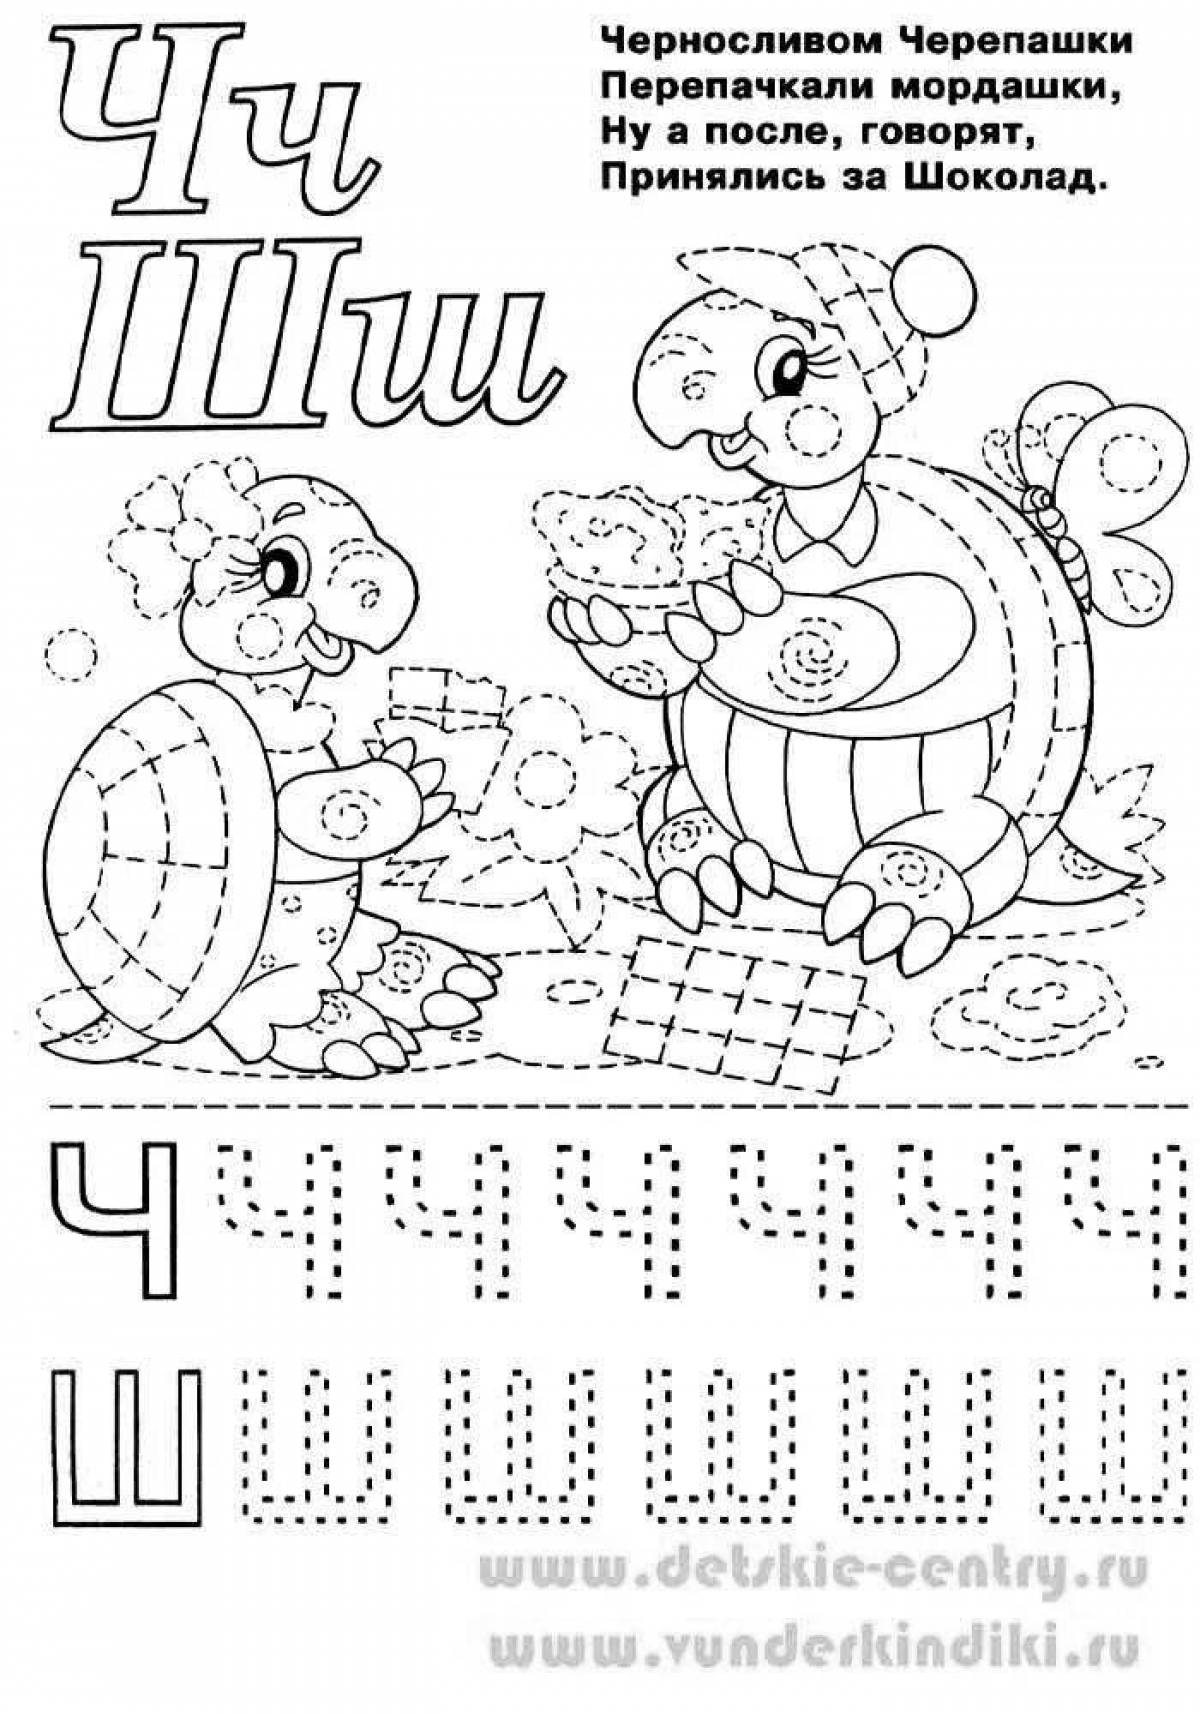 Colorful h coloring page for beginners